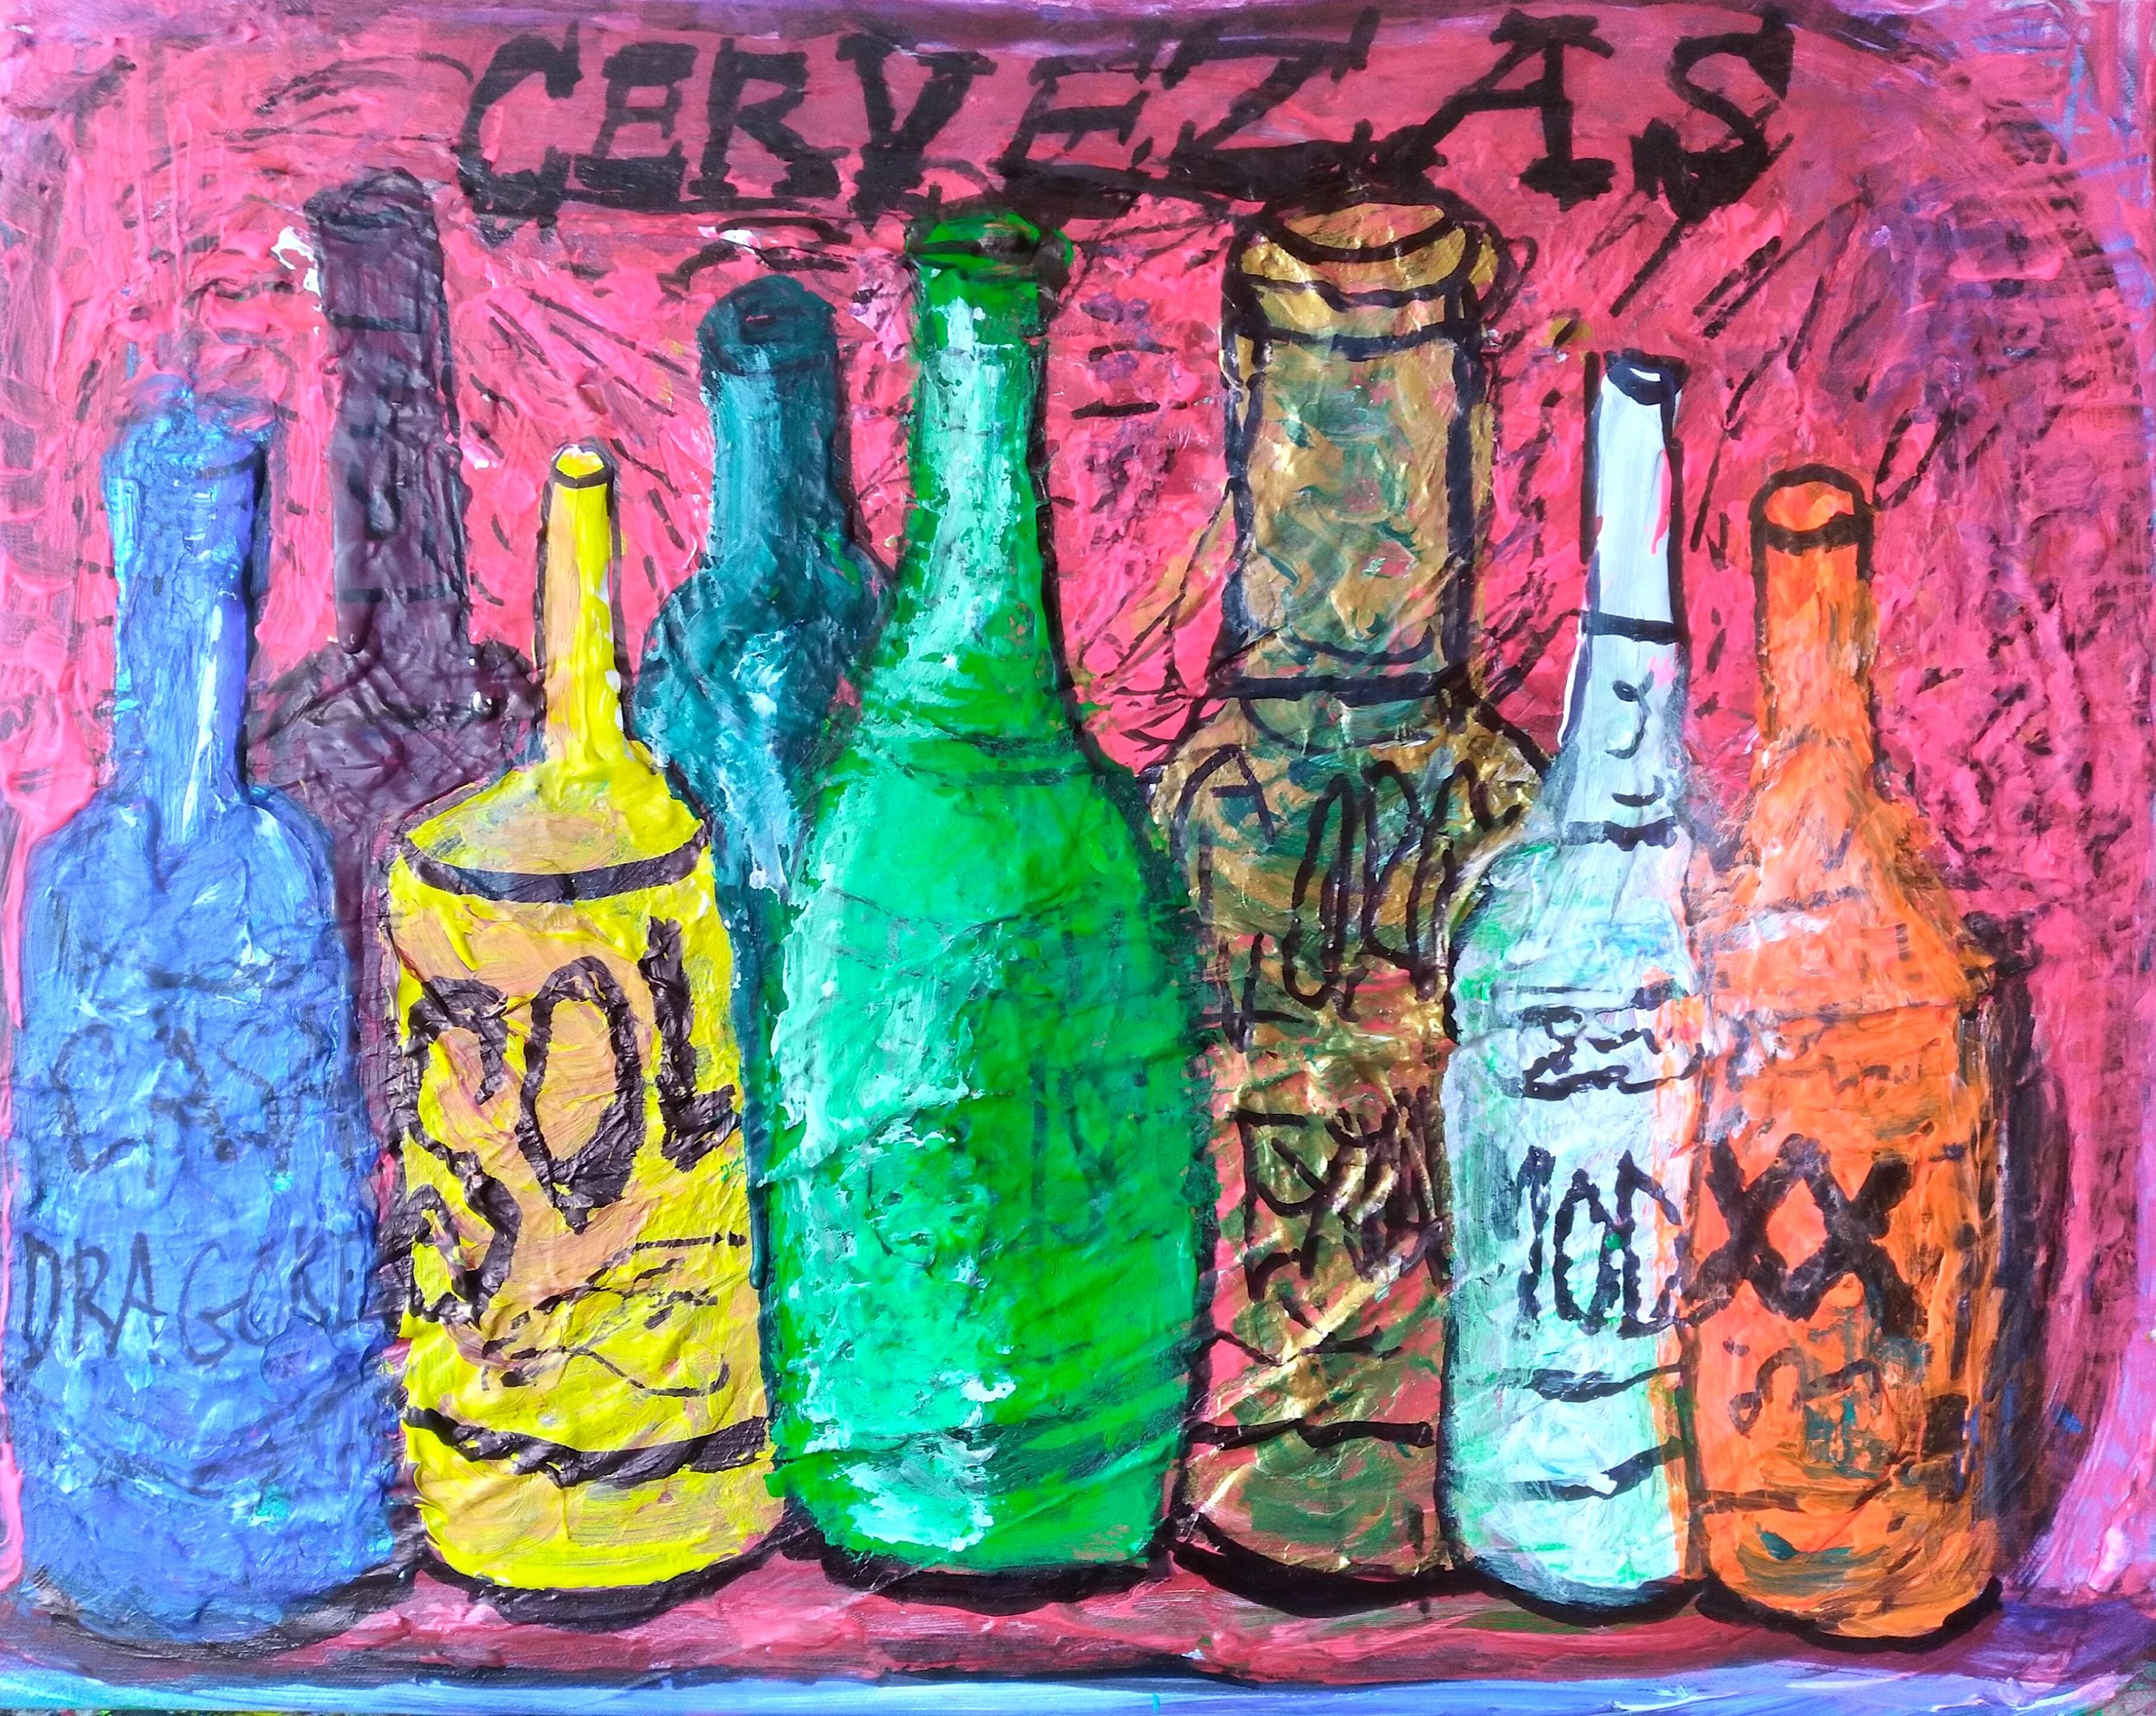 Eight Bottles of Beer on the Wall, 2009. Oil, acrylic on canvas. 16” x 20”.